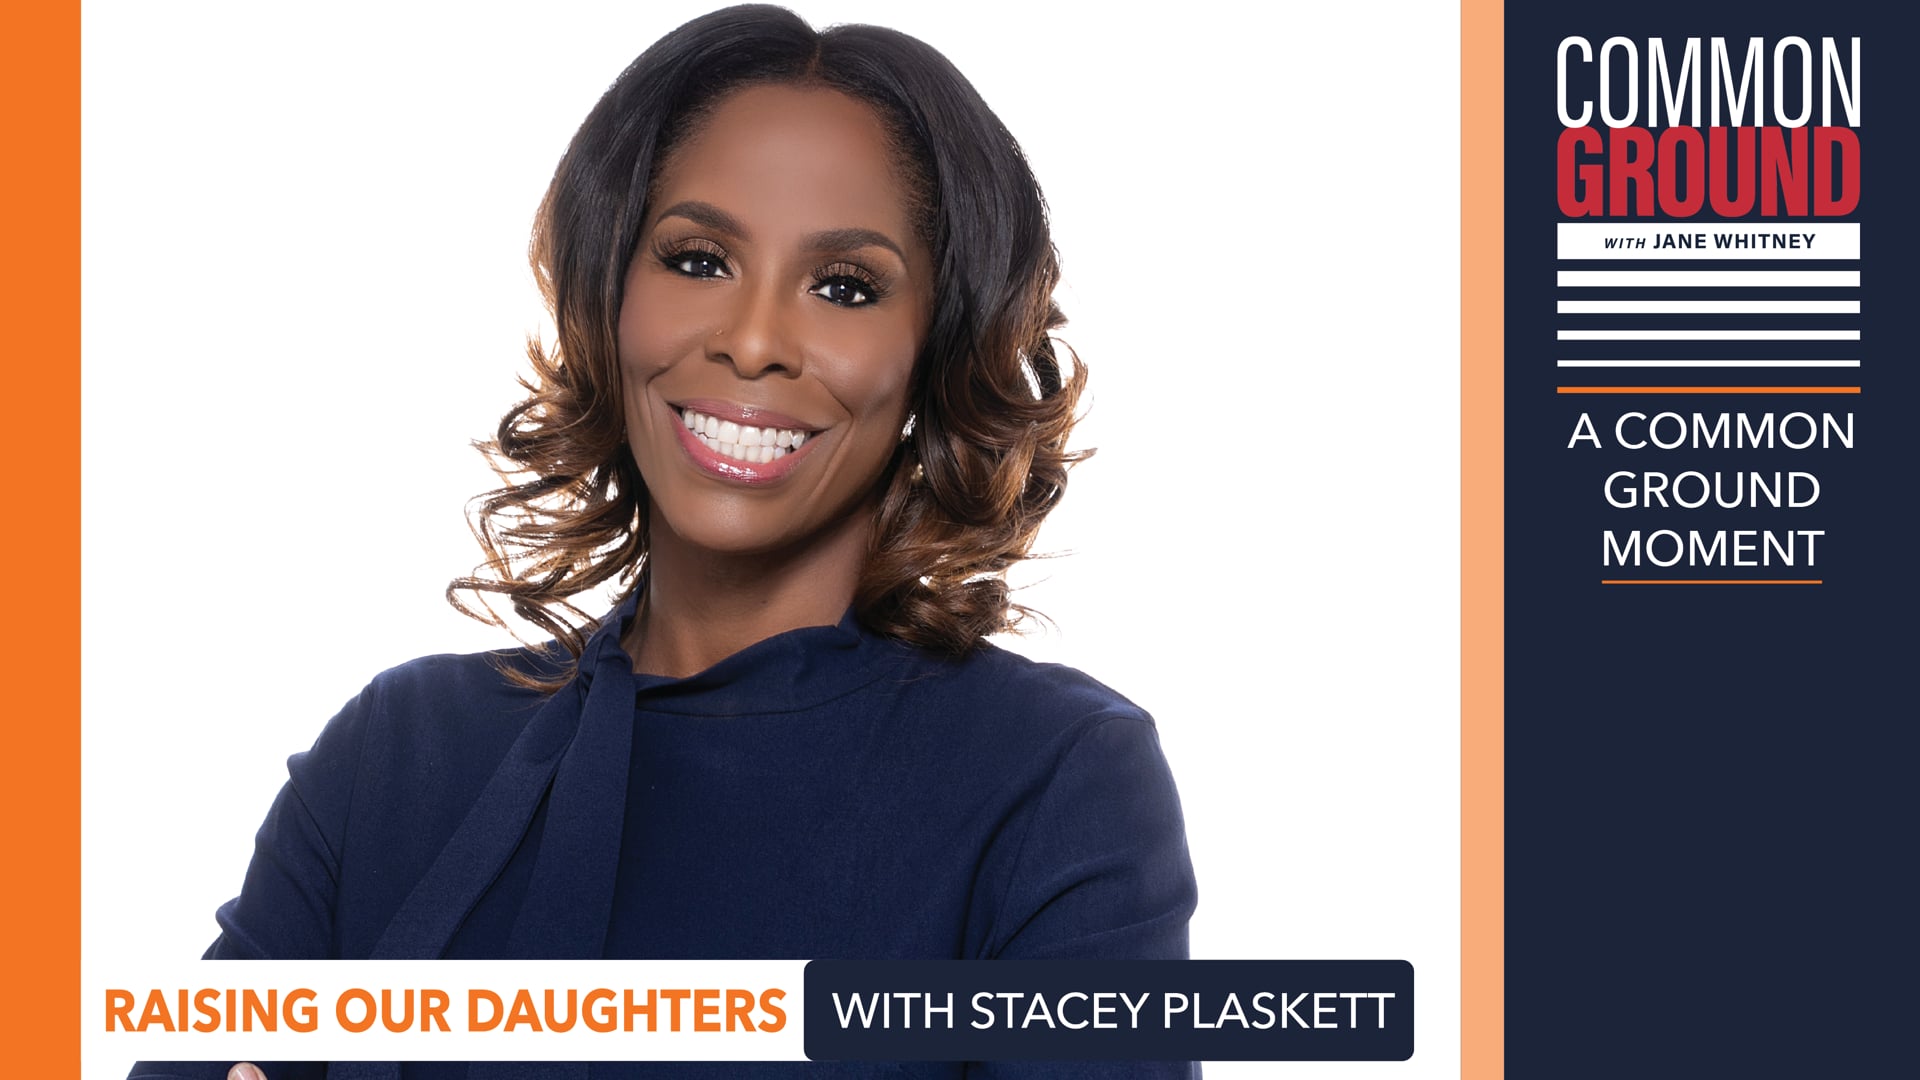 Raising Our Daughters with Stacey Plaskett